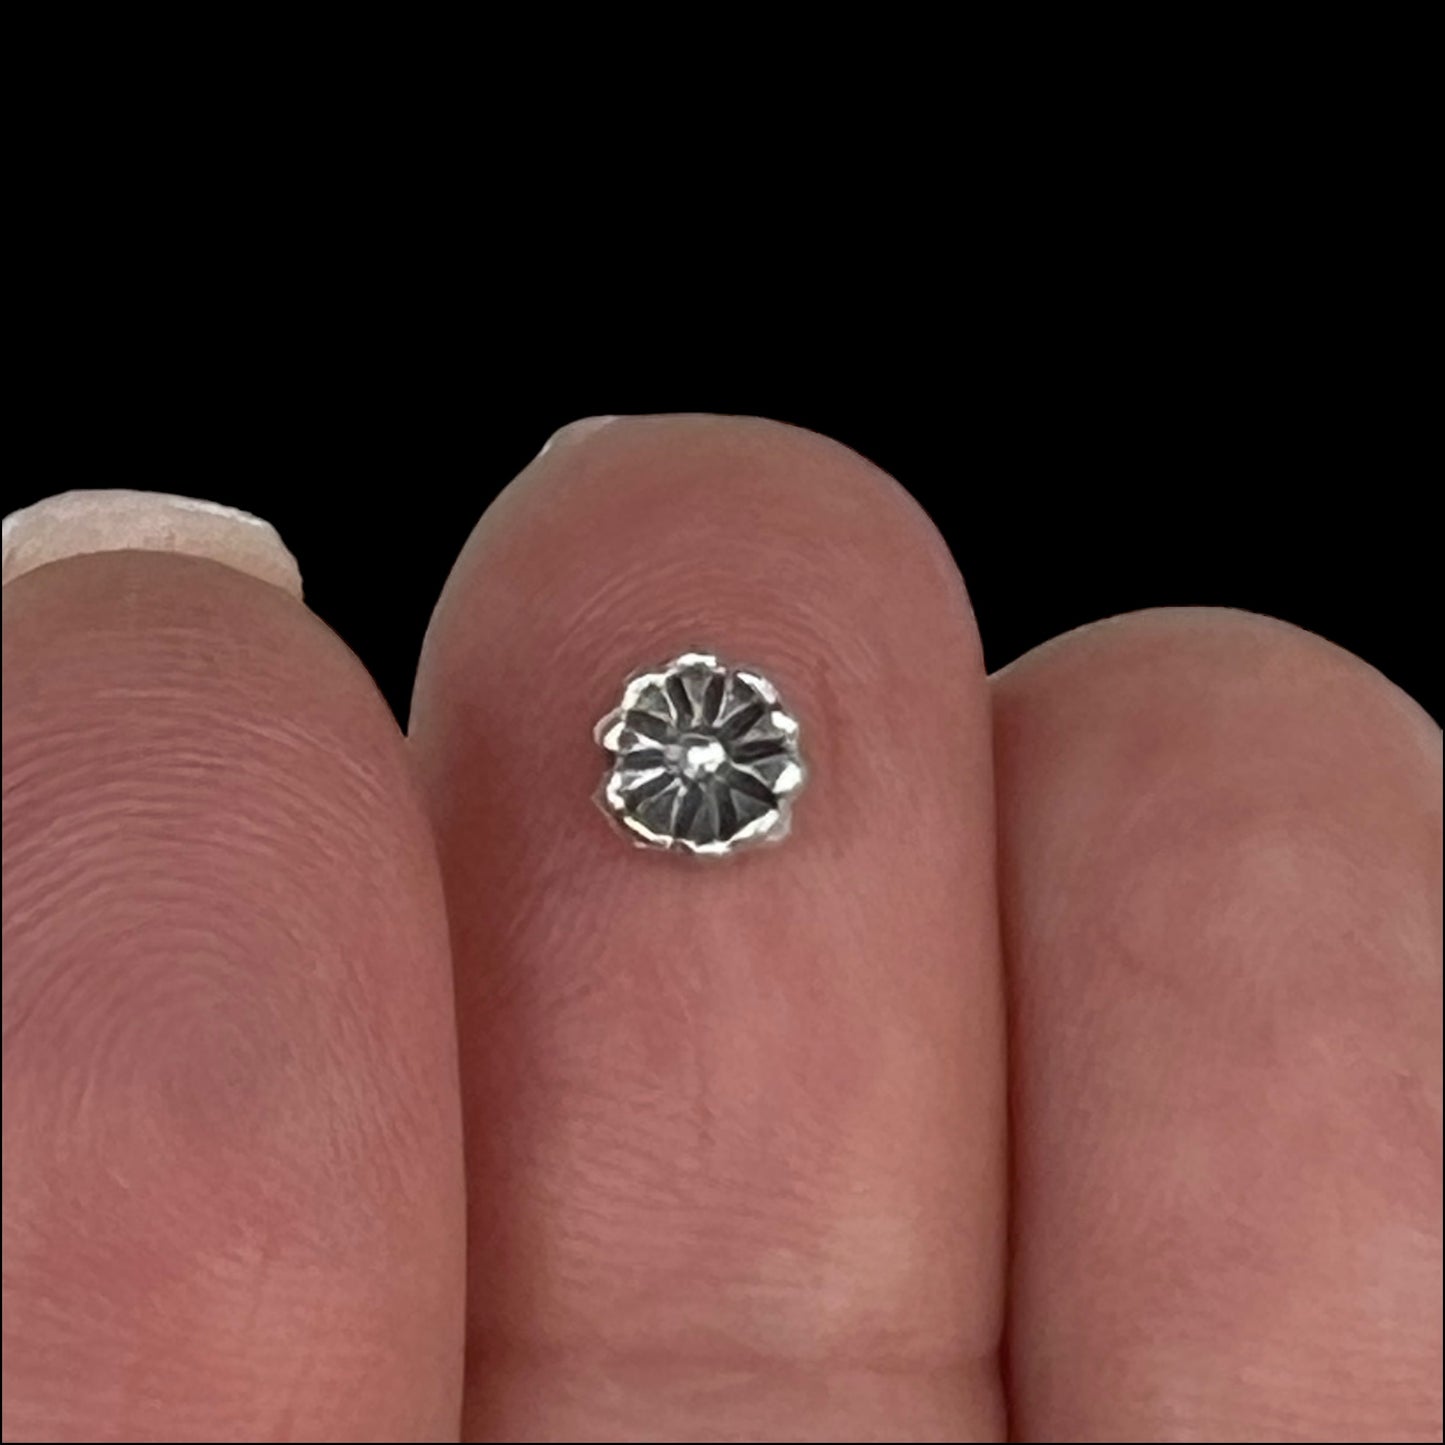 Teeny Flower casting for Jewelry Design